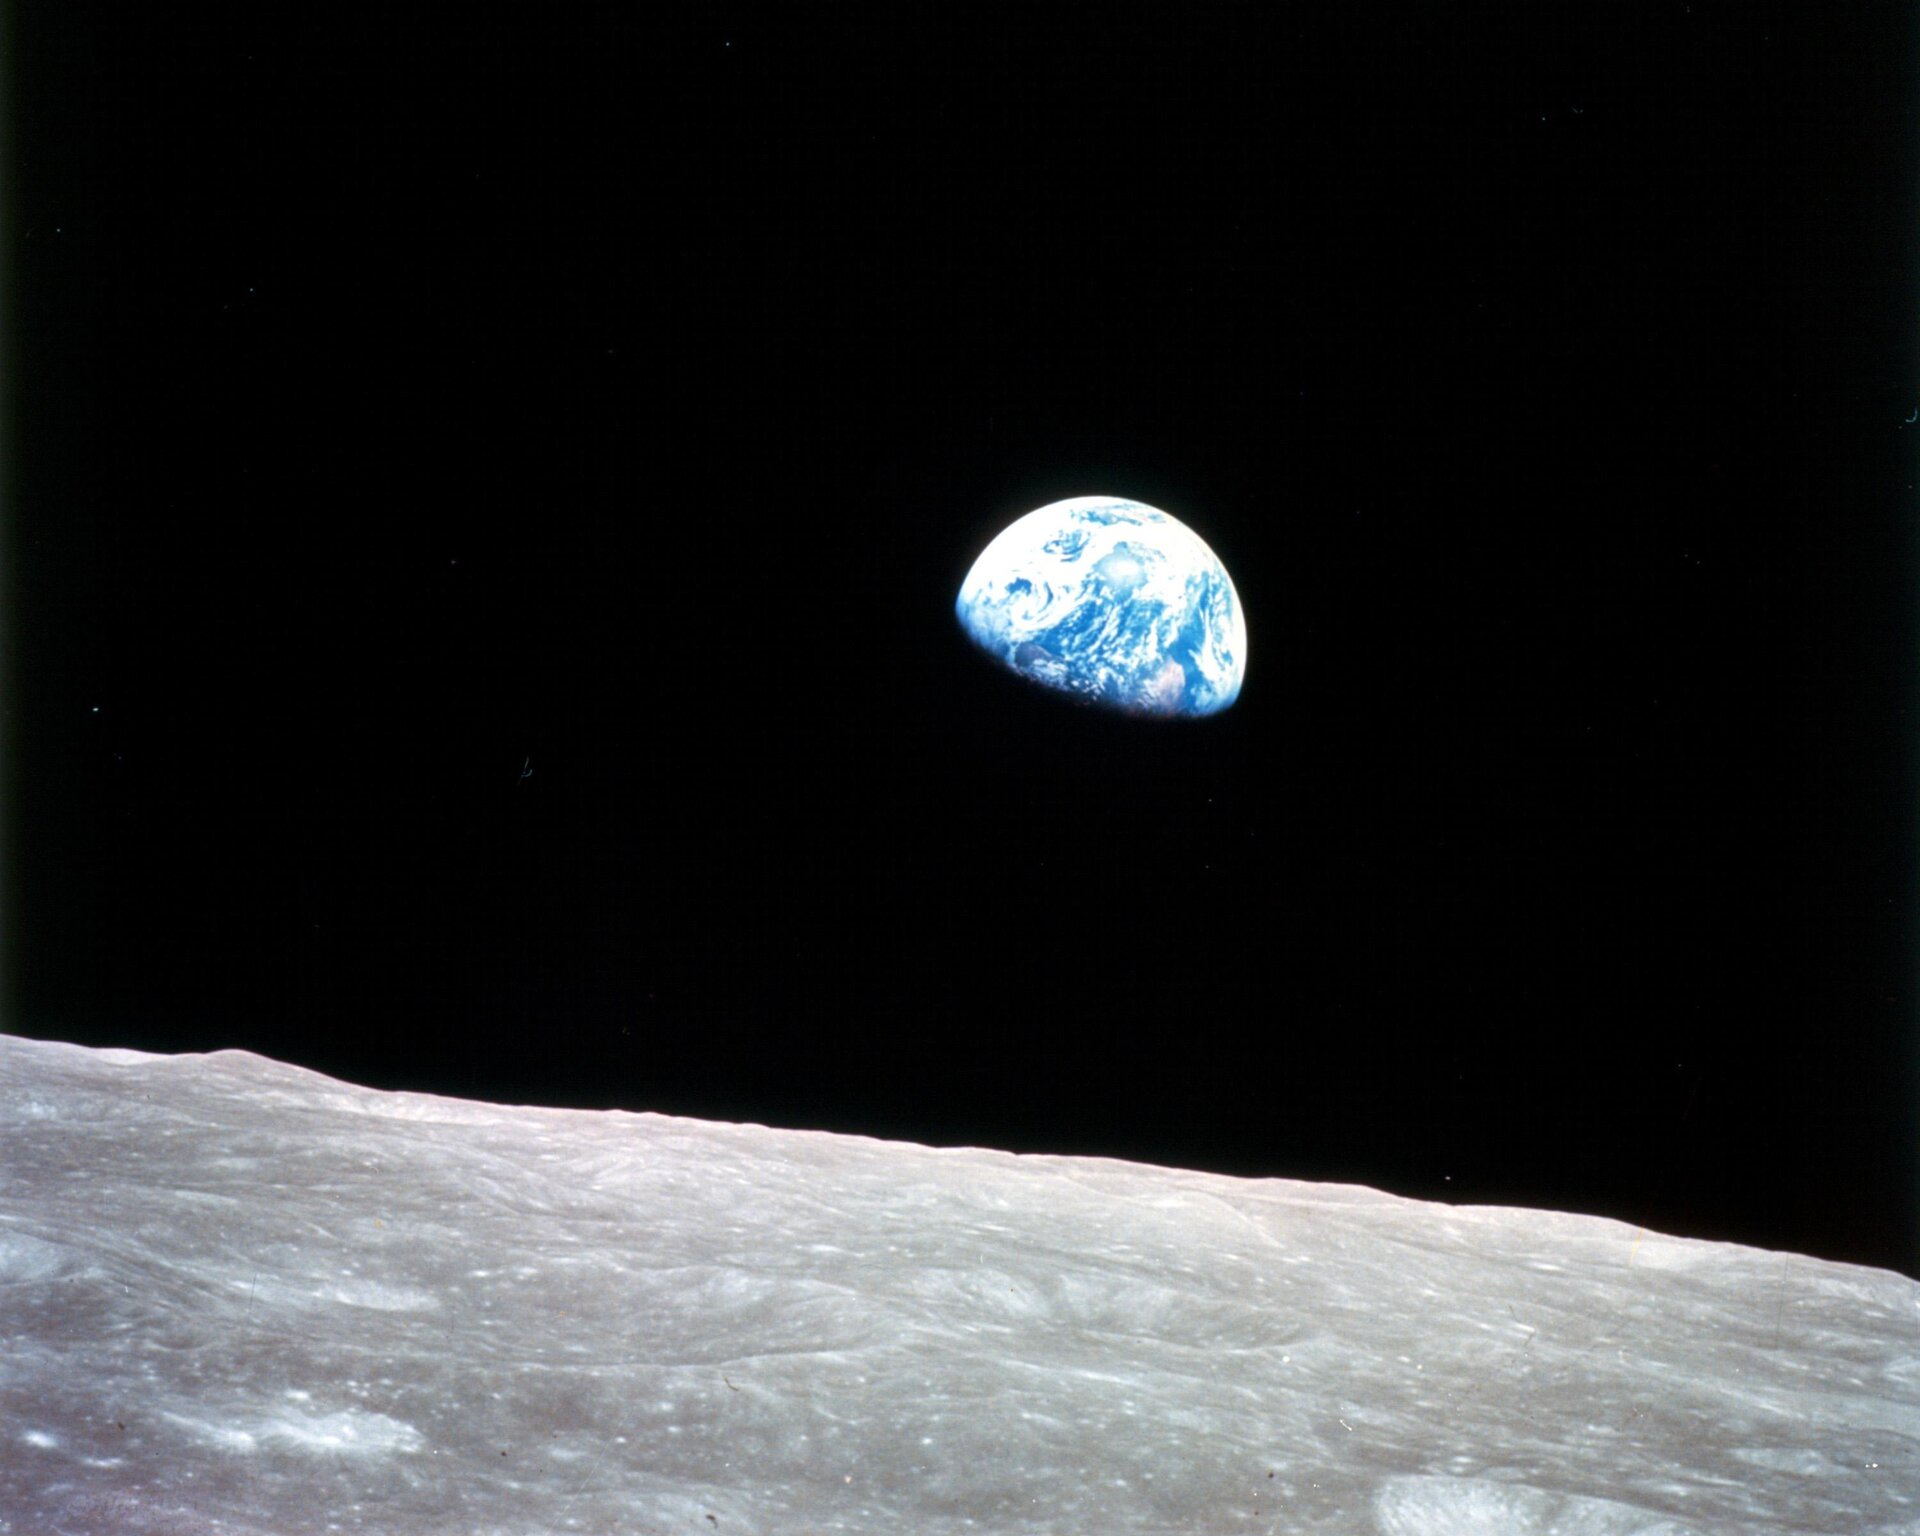 Earthrise image captured by NASA astronaut William Anders